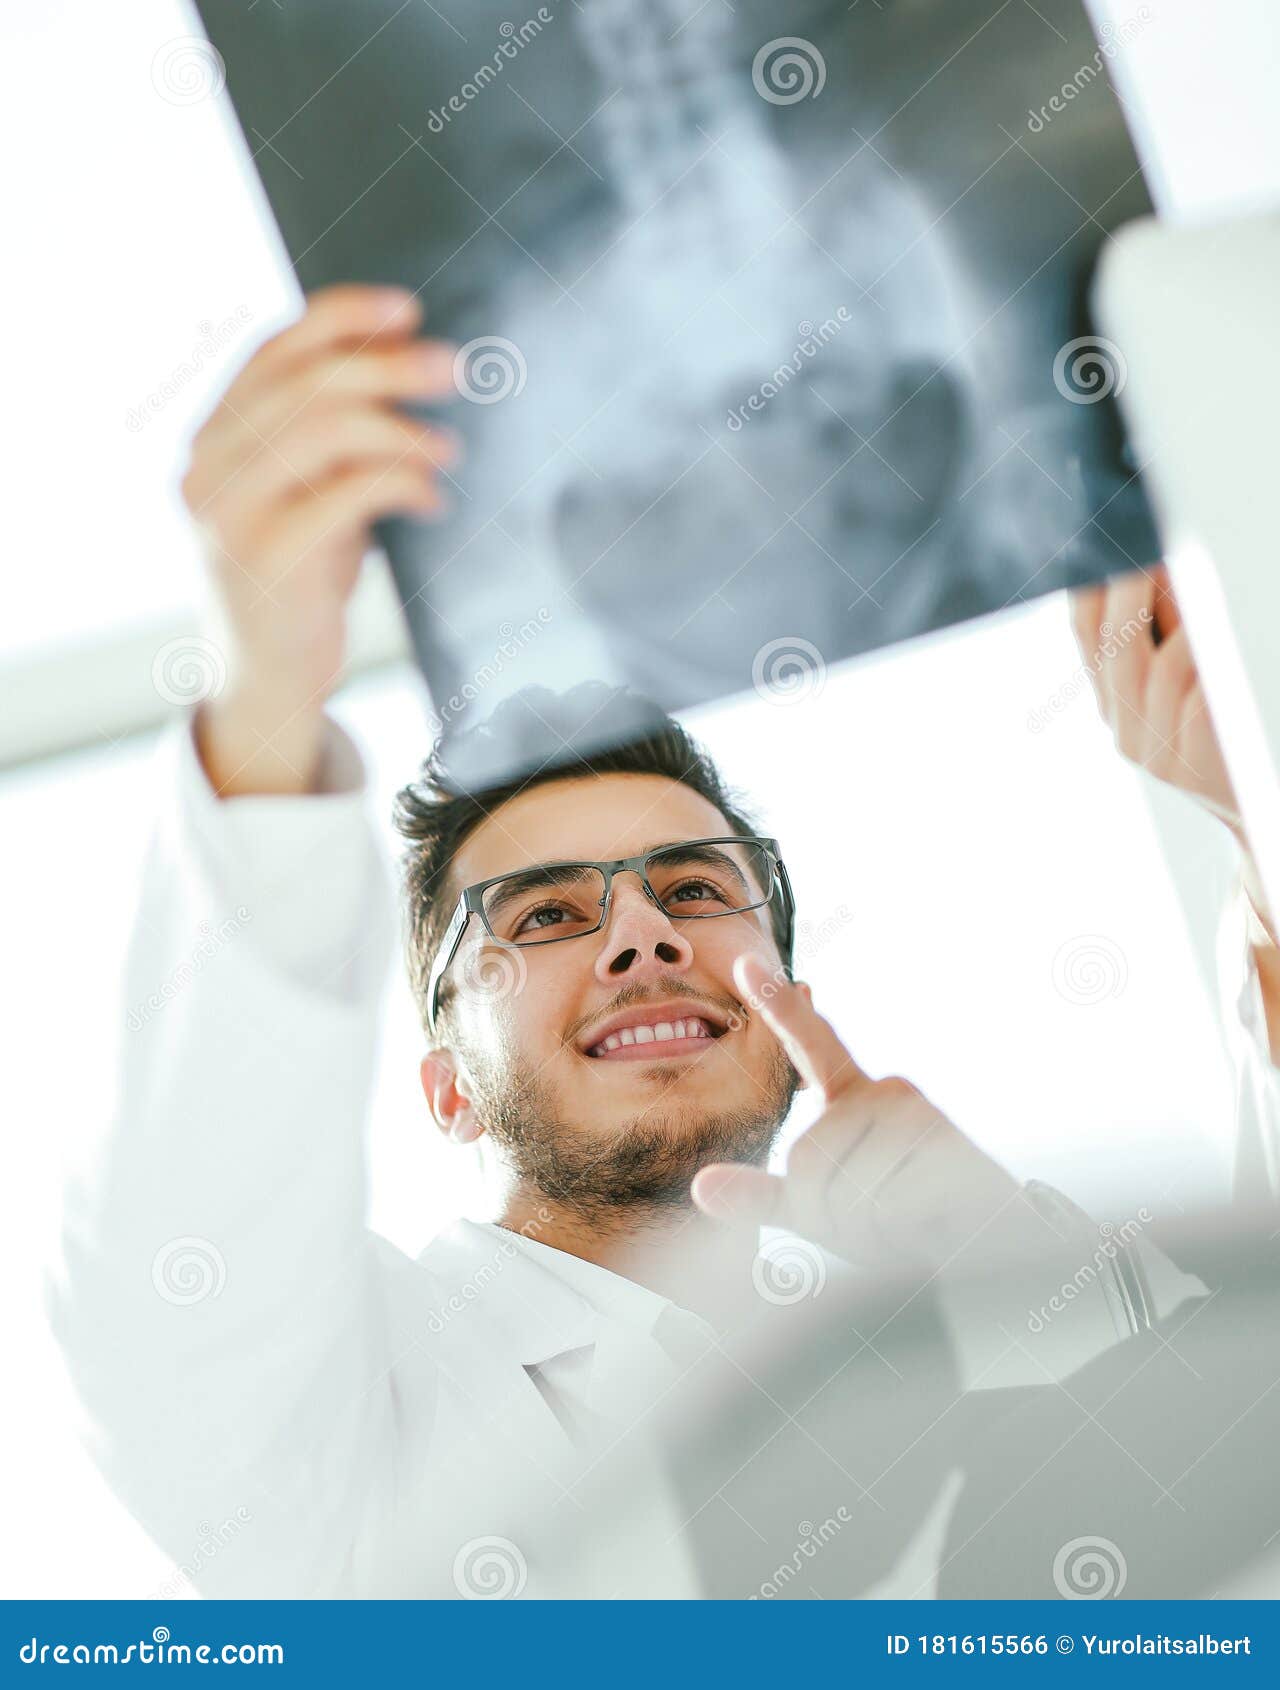 smiling orthopedist doctor looks at the x - ray of the patient